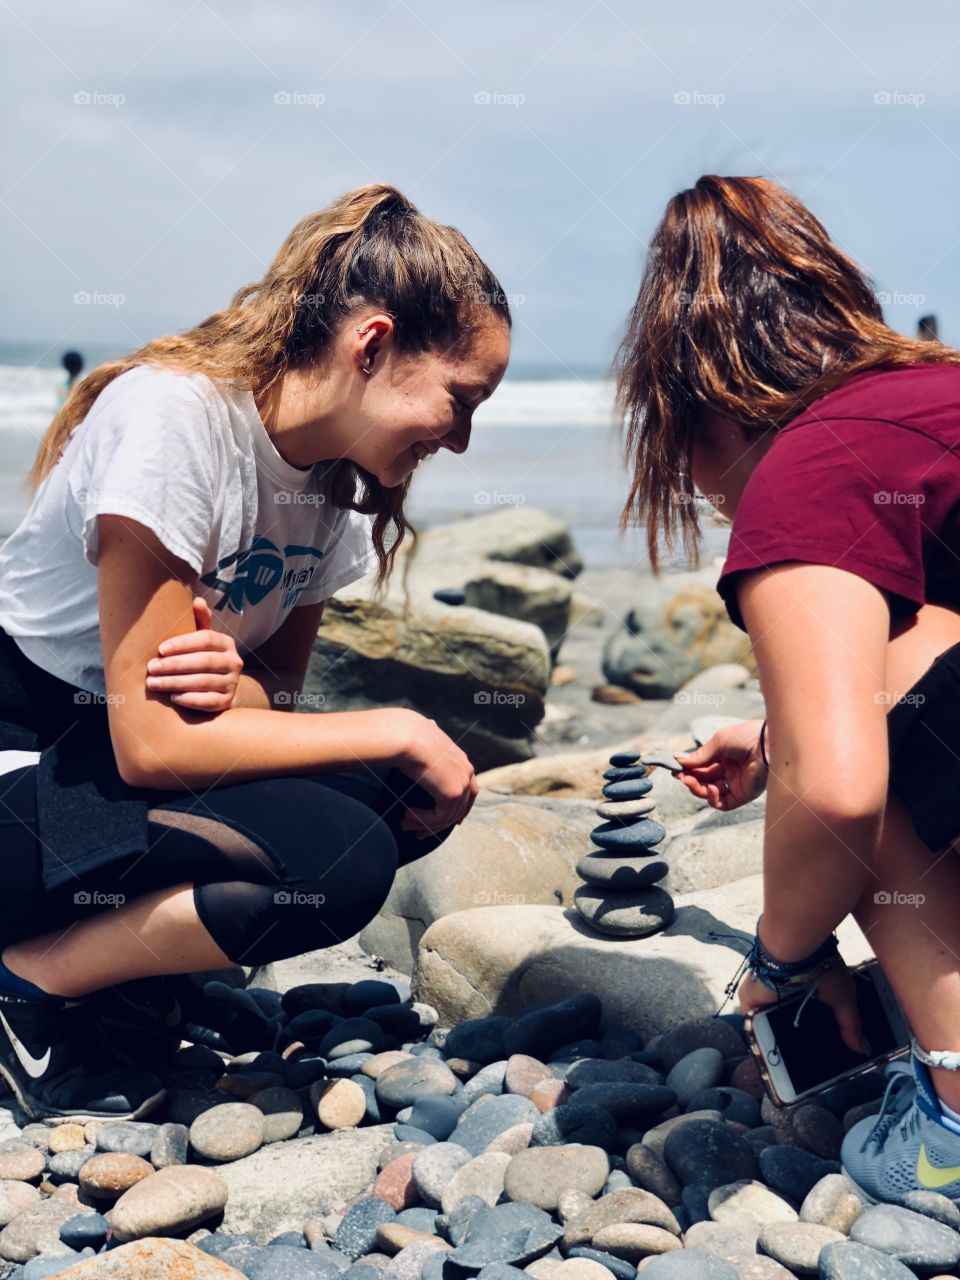 Finding balance in our lives one rock at a time